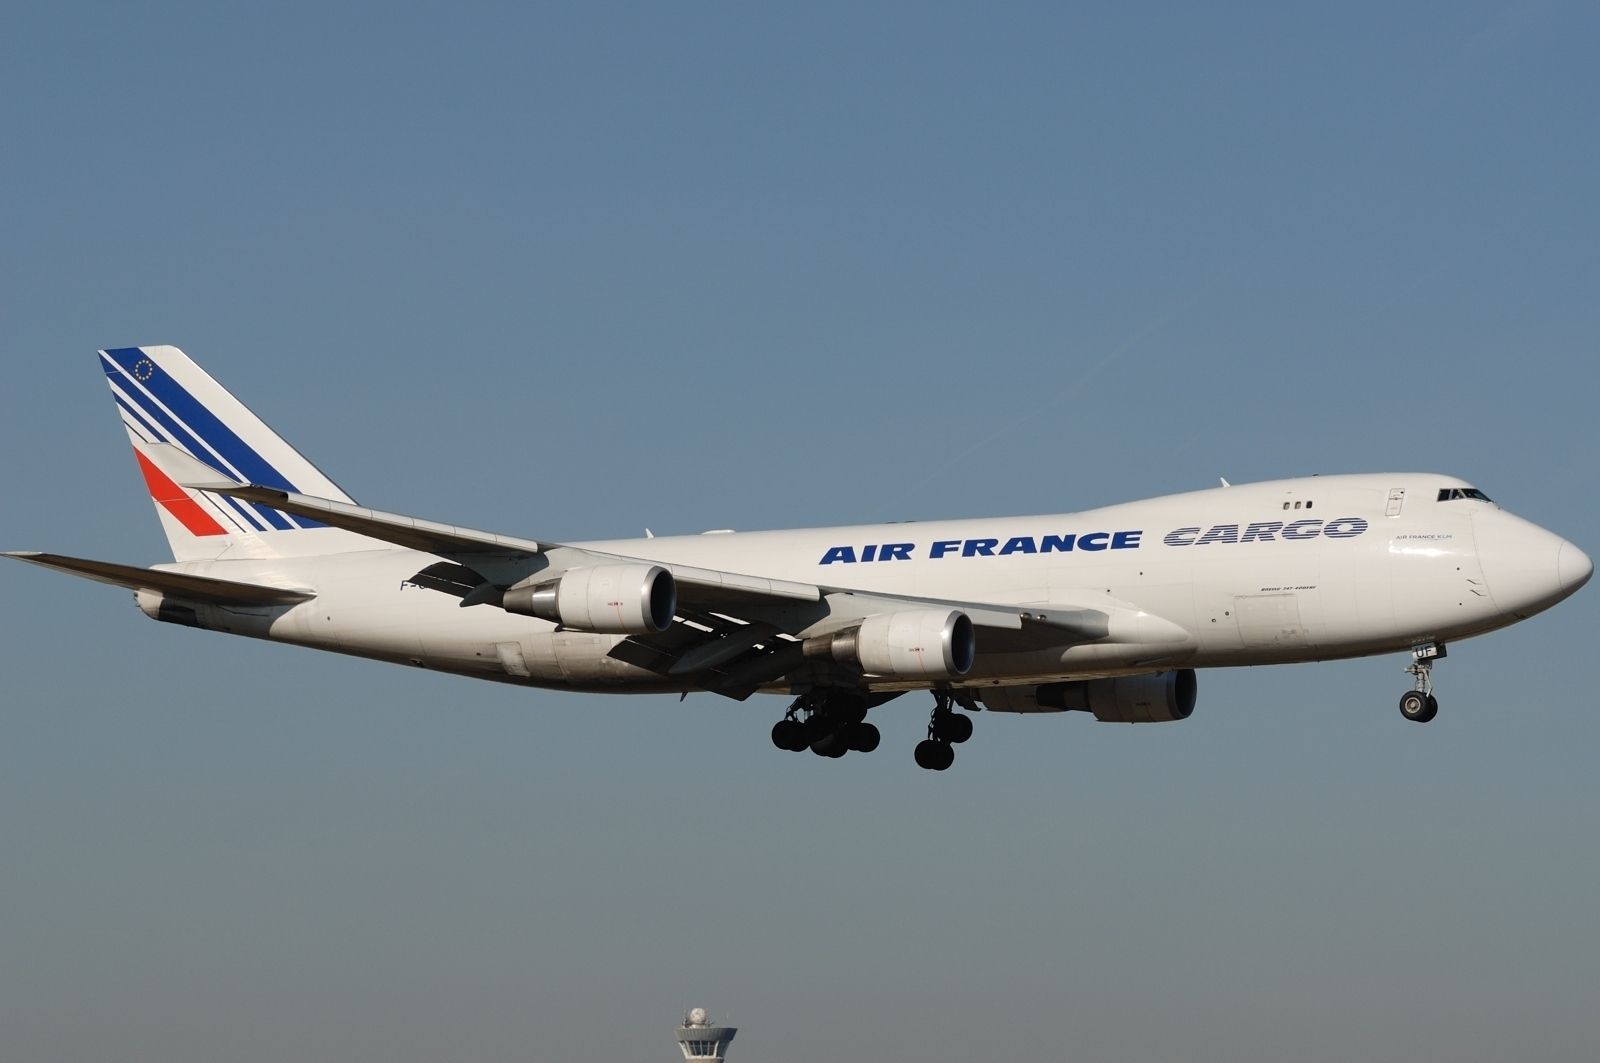 Air France Cargo Boeing 747 400 At Charles De Gaulle